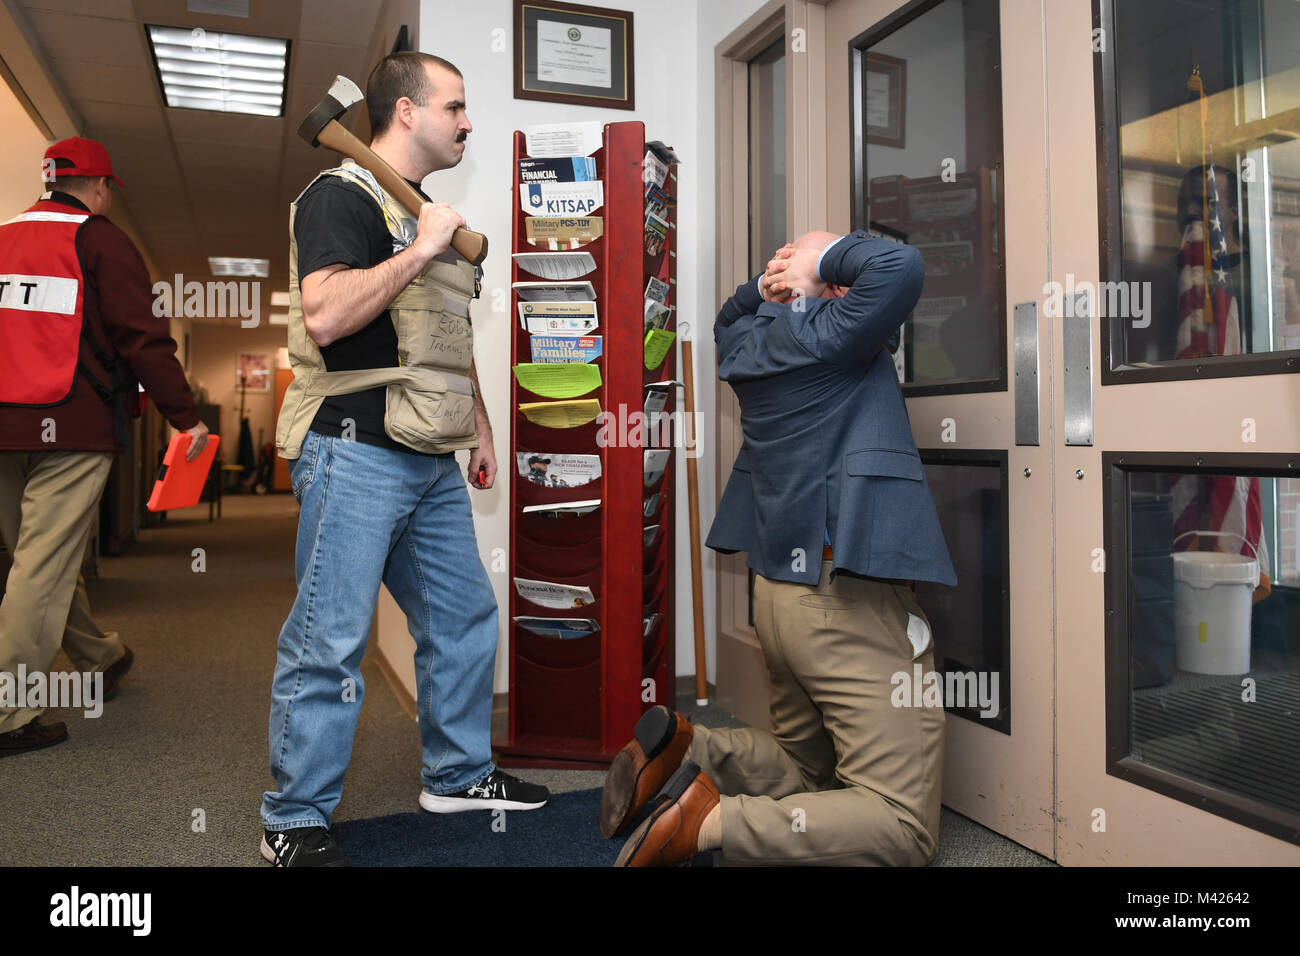 180131-N-NP779-0036 SILVERDALE, Wash. (Jan. 31, 2018) Master-at-Arms 1st Class Jordan Jones plays the role of a terrorist, holding hostage Paul Rosarius, NBK Fleet and Family Readiness Director, during a Naval Base Kitsap active shooter drill as part of Exercise Citadel Shield-Solid Curtain 2018 (CS/SC 18). CS/SC 18 is an anti-terrorism and force protection exercise conducted by Navy installations within the continental United States to ensure that the Navy is ready to respond to changing and dynamic threats at all times.   (U.S. Navy photo by Mass Communication Specialist 1st Class Ty Connors Stock Photo